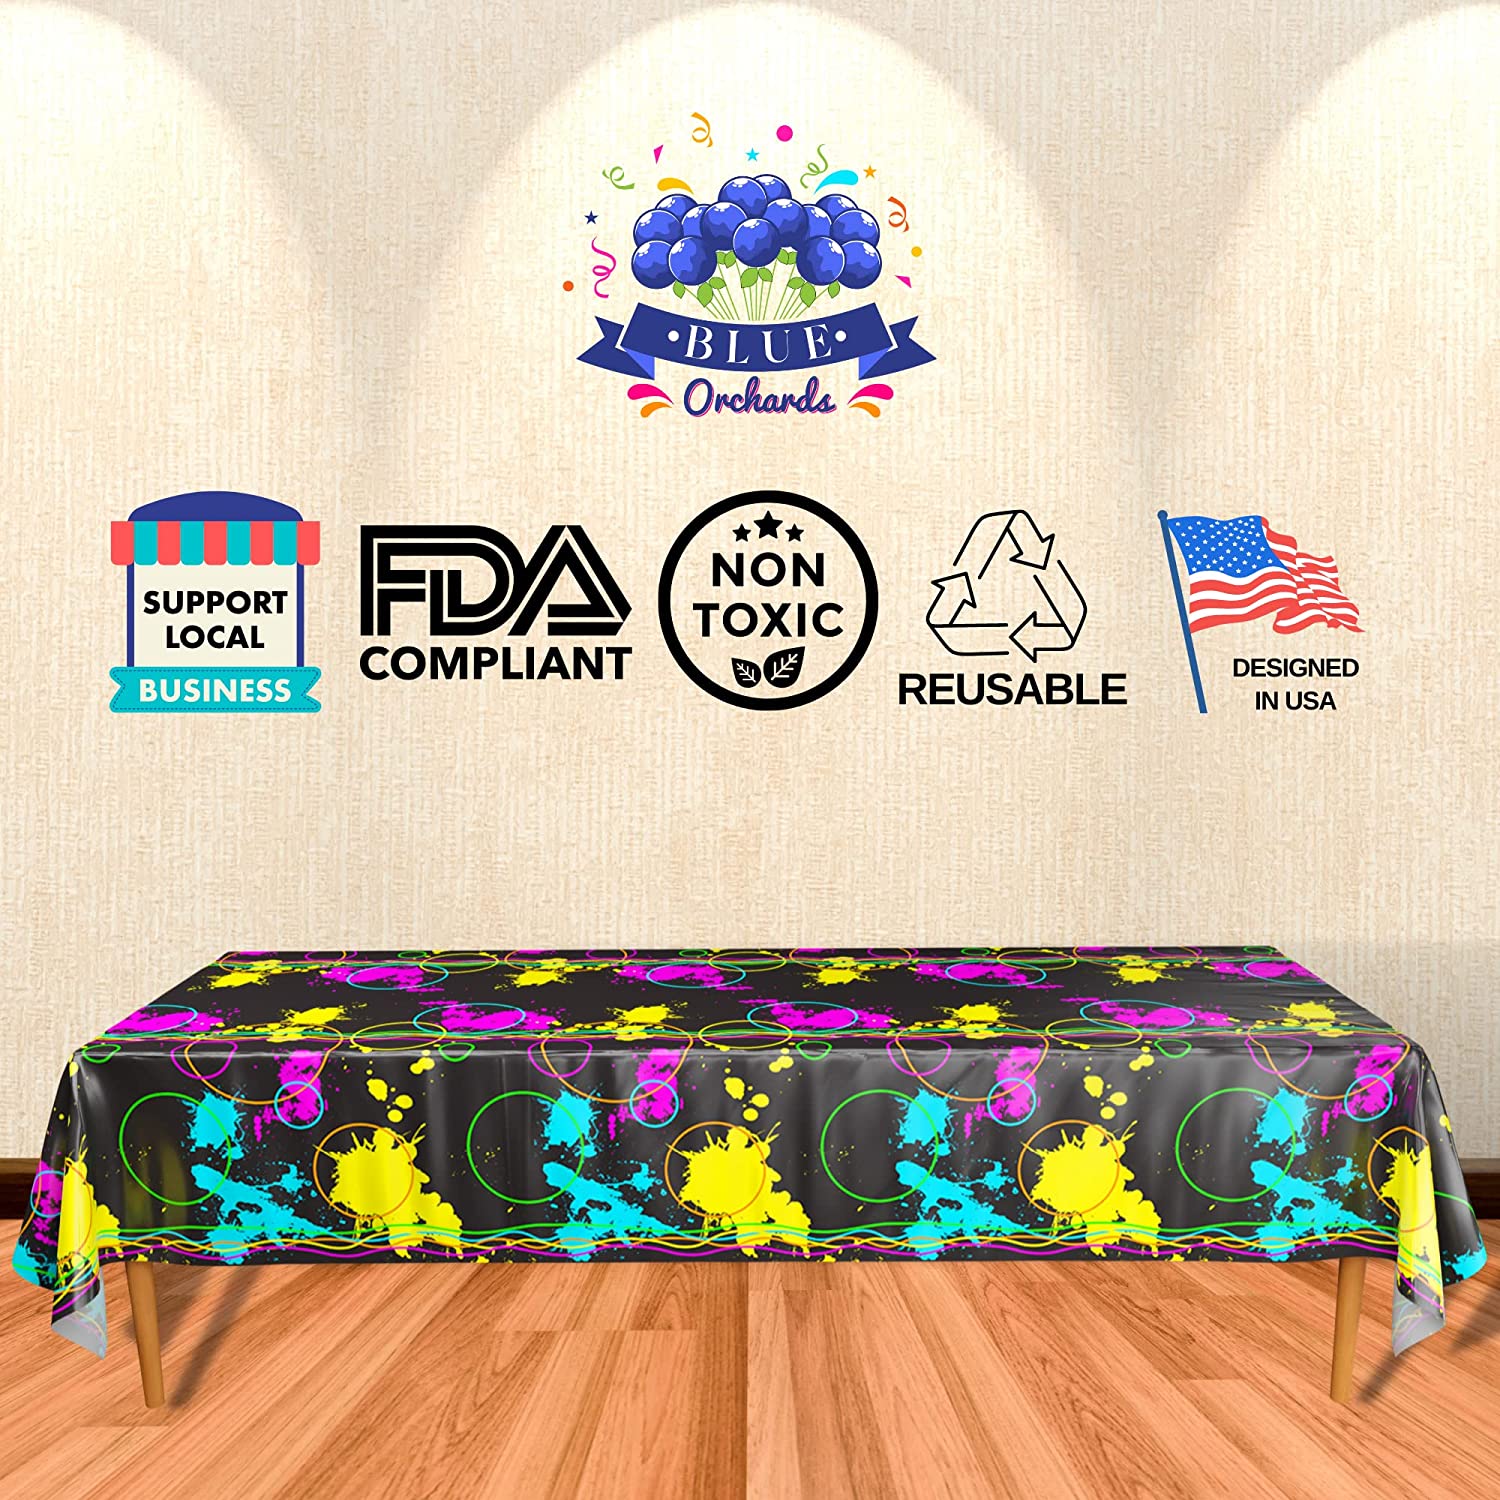 A vibrant Glow Party Table covers Neon Party Supplies that are FDA Compliant, Non Toxic, Reusable, and Designed in USA, a perfect complement to your summer party, black light event, glow birthday and/or other glow themed celebration!